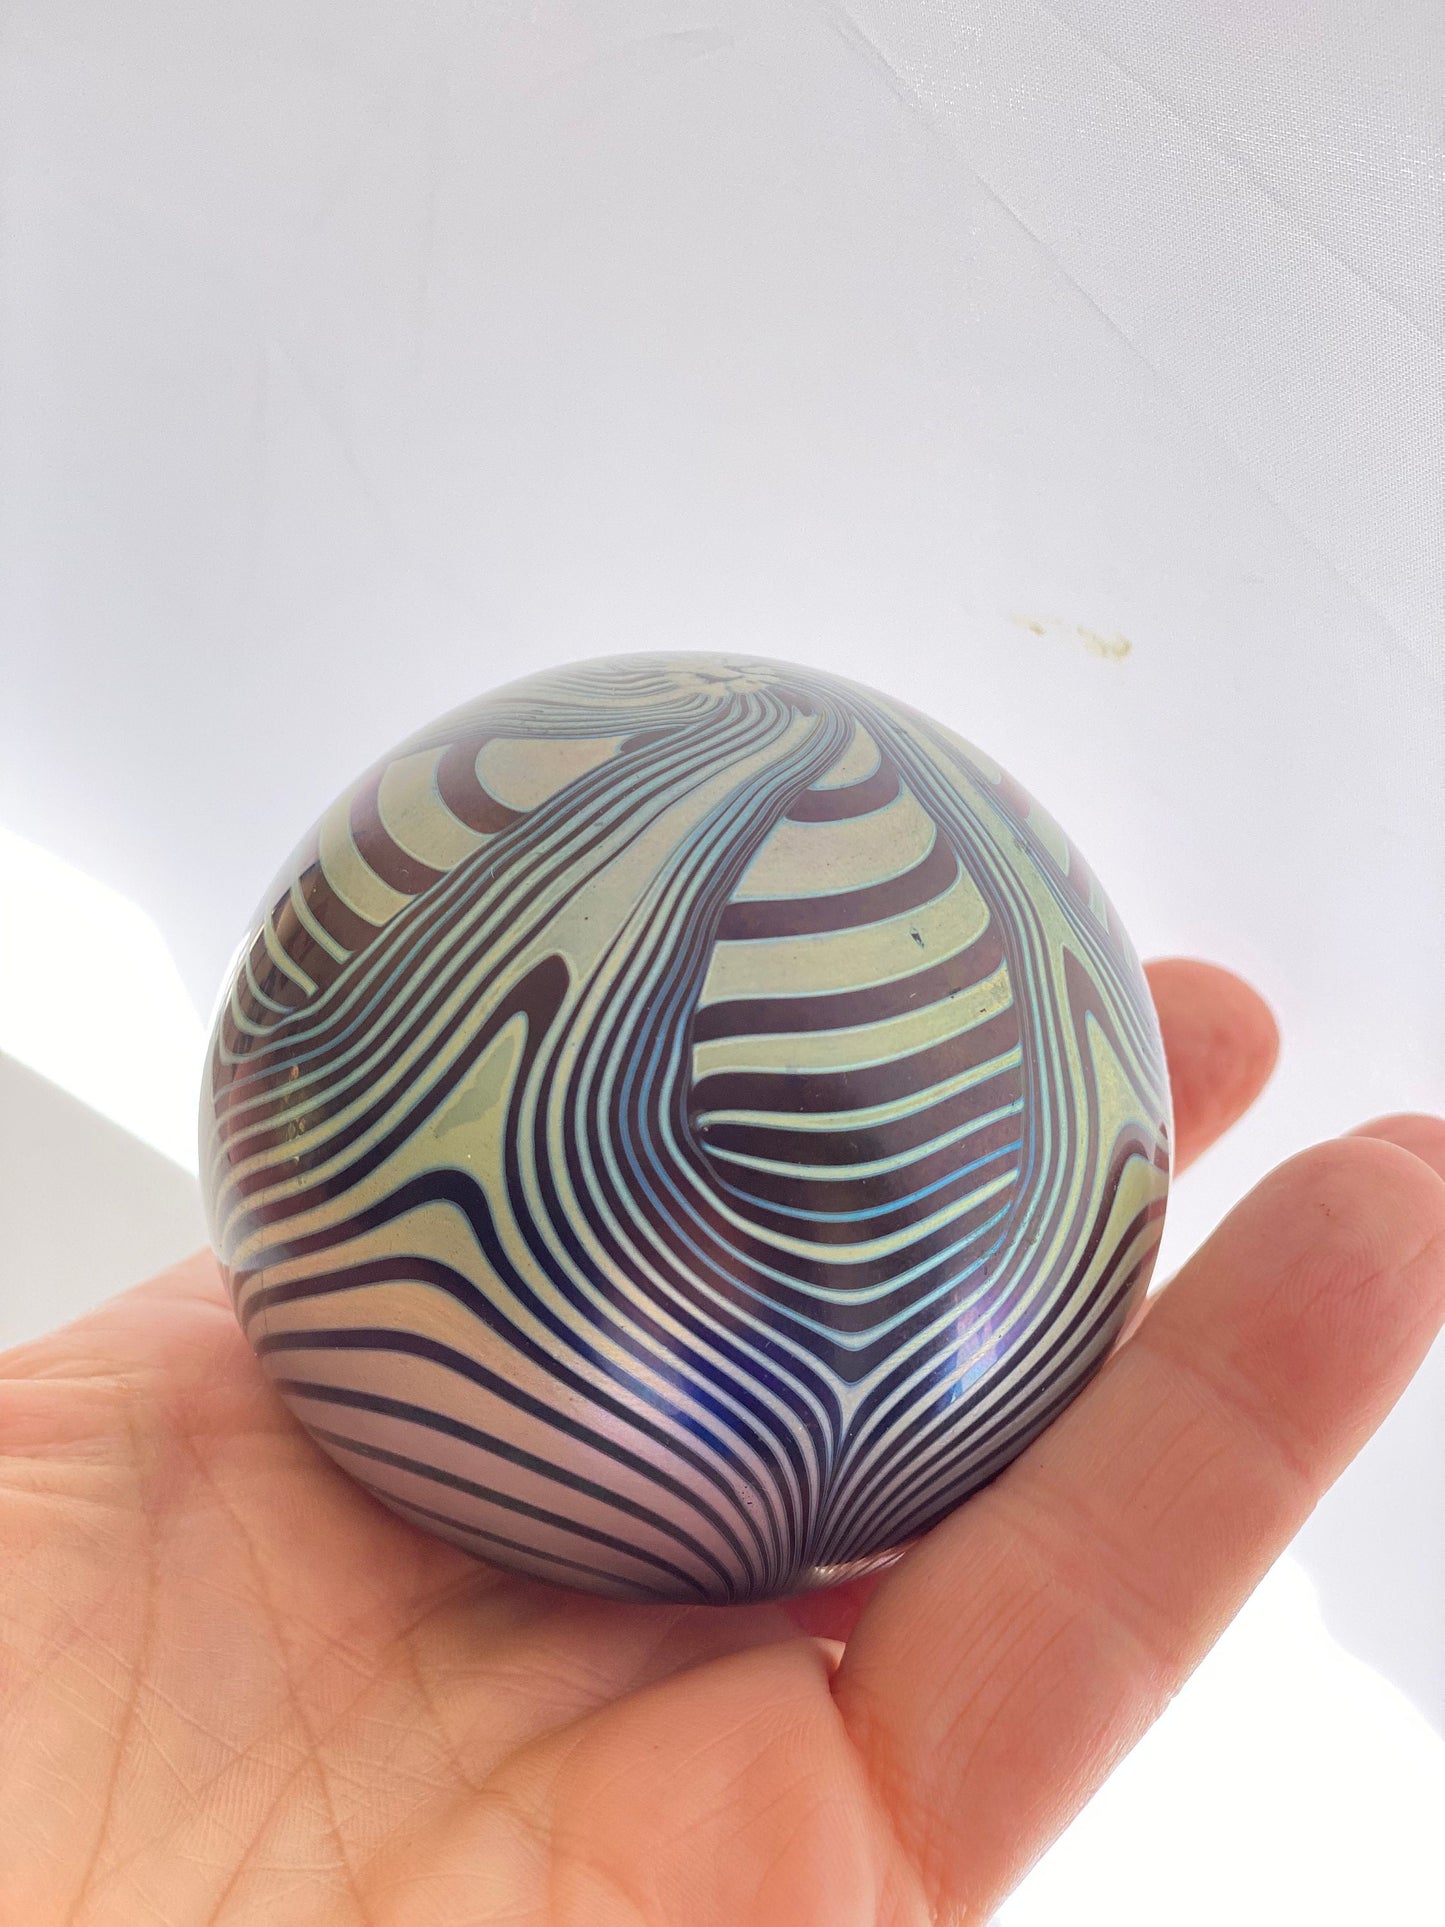 A vintage Okra Studio Glass Blue Black Iridescent Feathered Glass Paperweight by Nicola Osbourne and Richard Golding